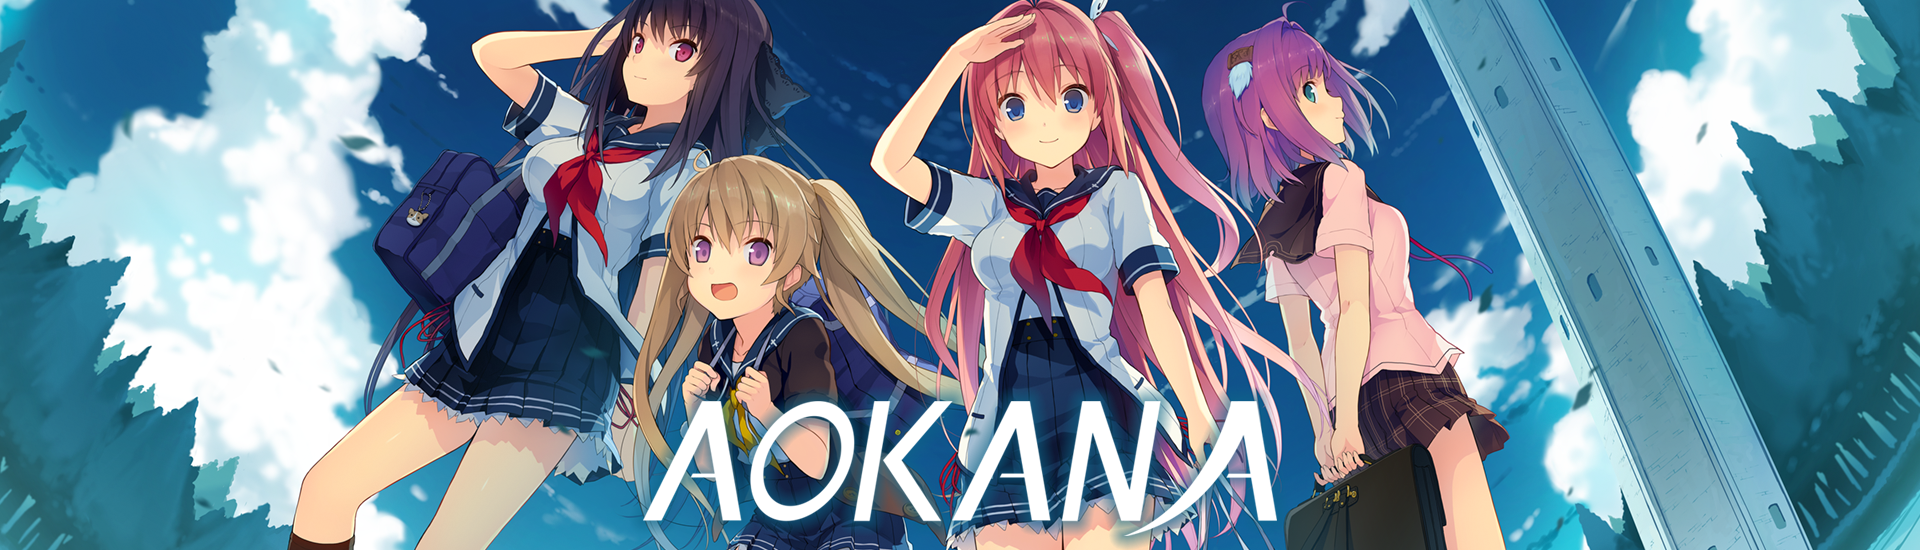 NekoNyanSoft on X: FYI, the Steam store page for Hello, good-bye that's  currently up on Steam is NOT from us. It looks like someone decided to  create a fake store page! Our